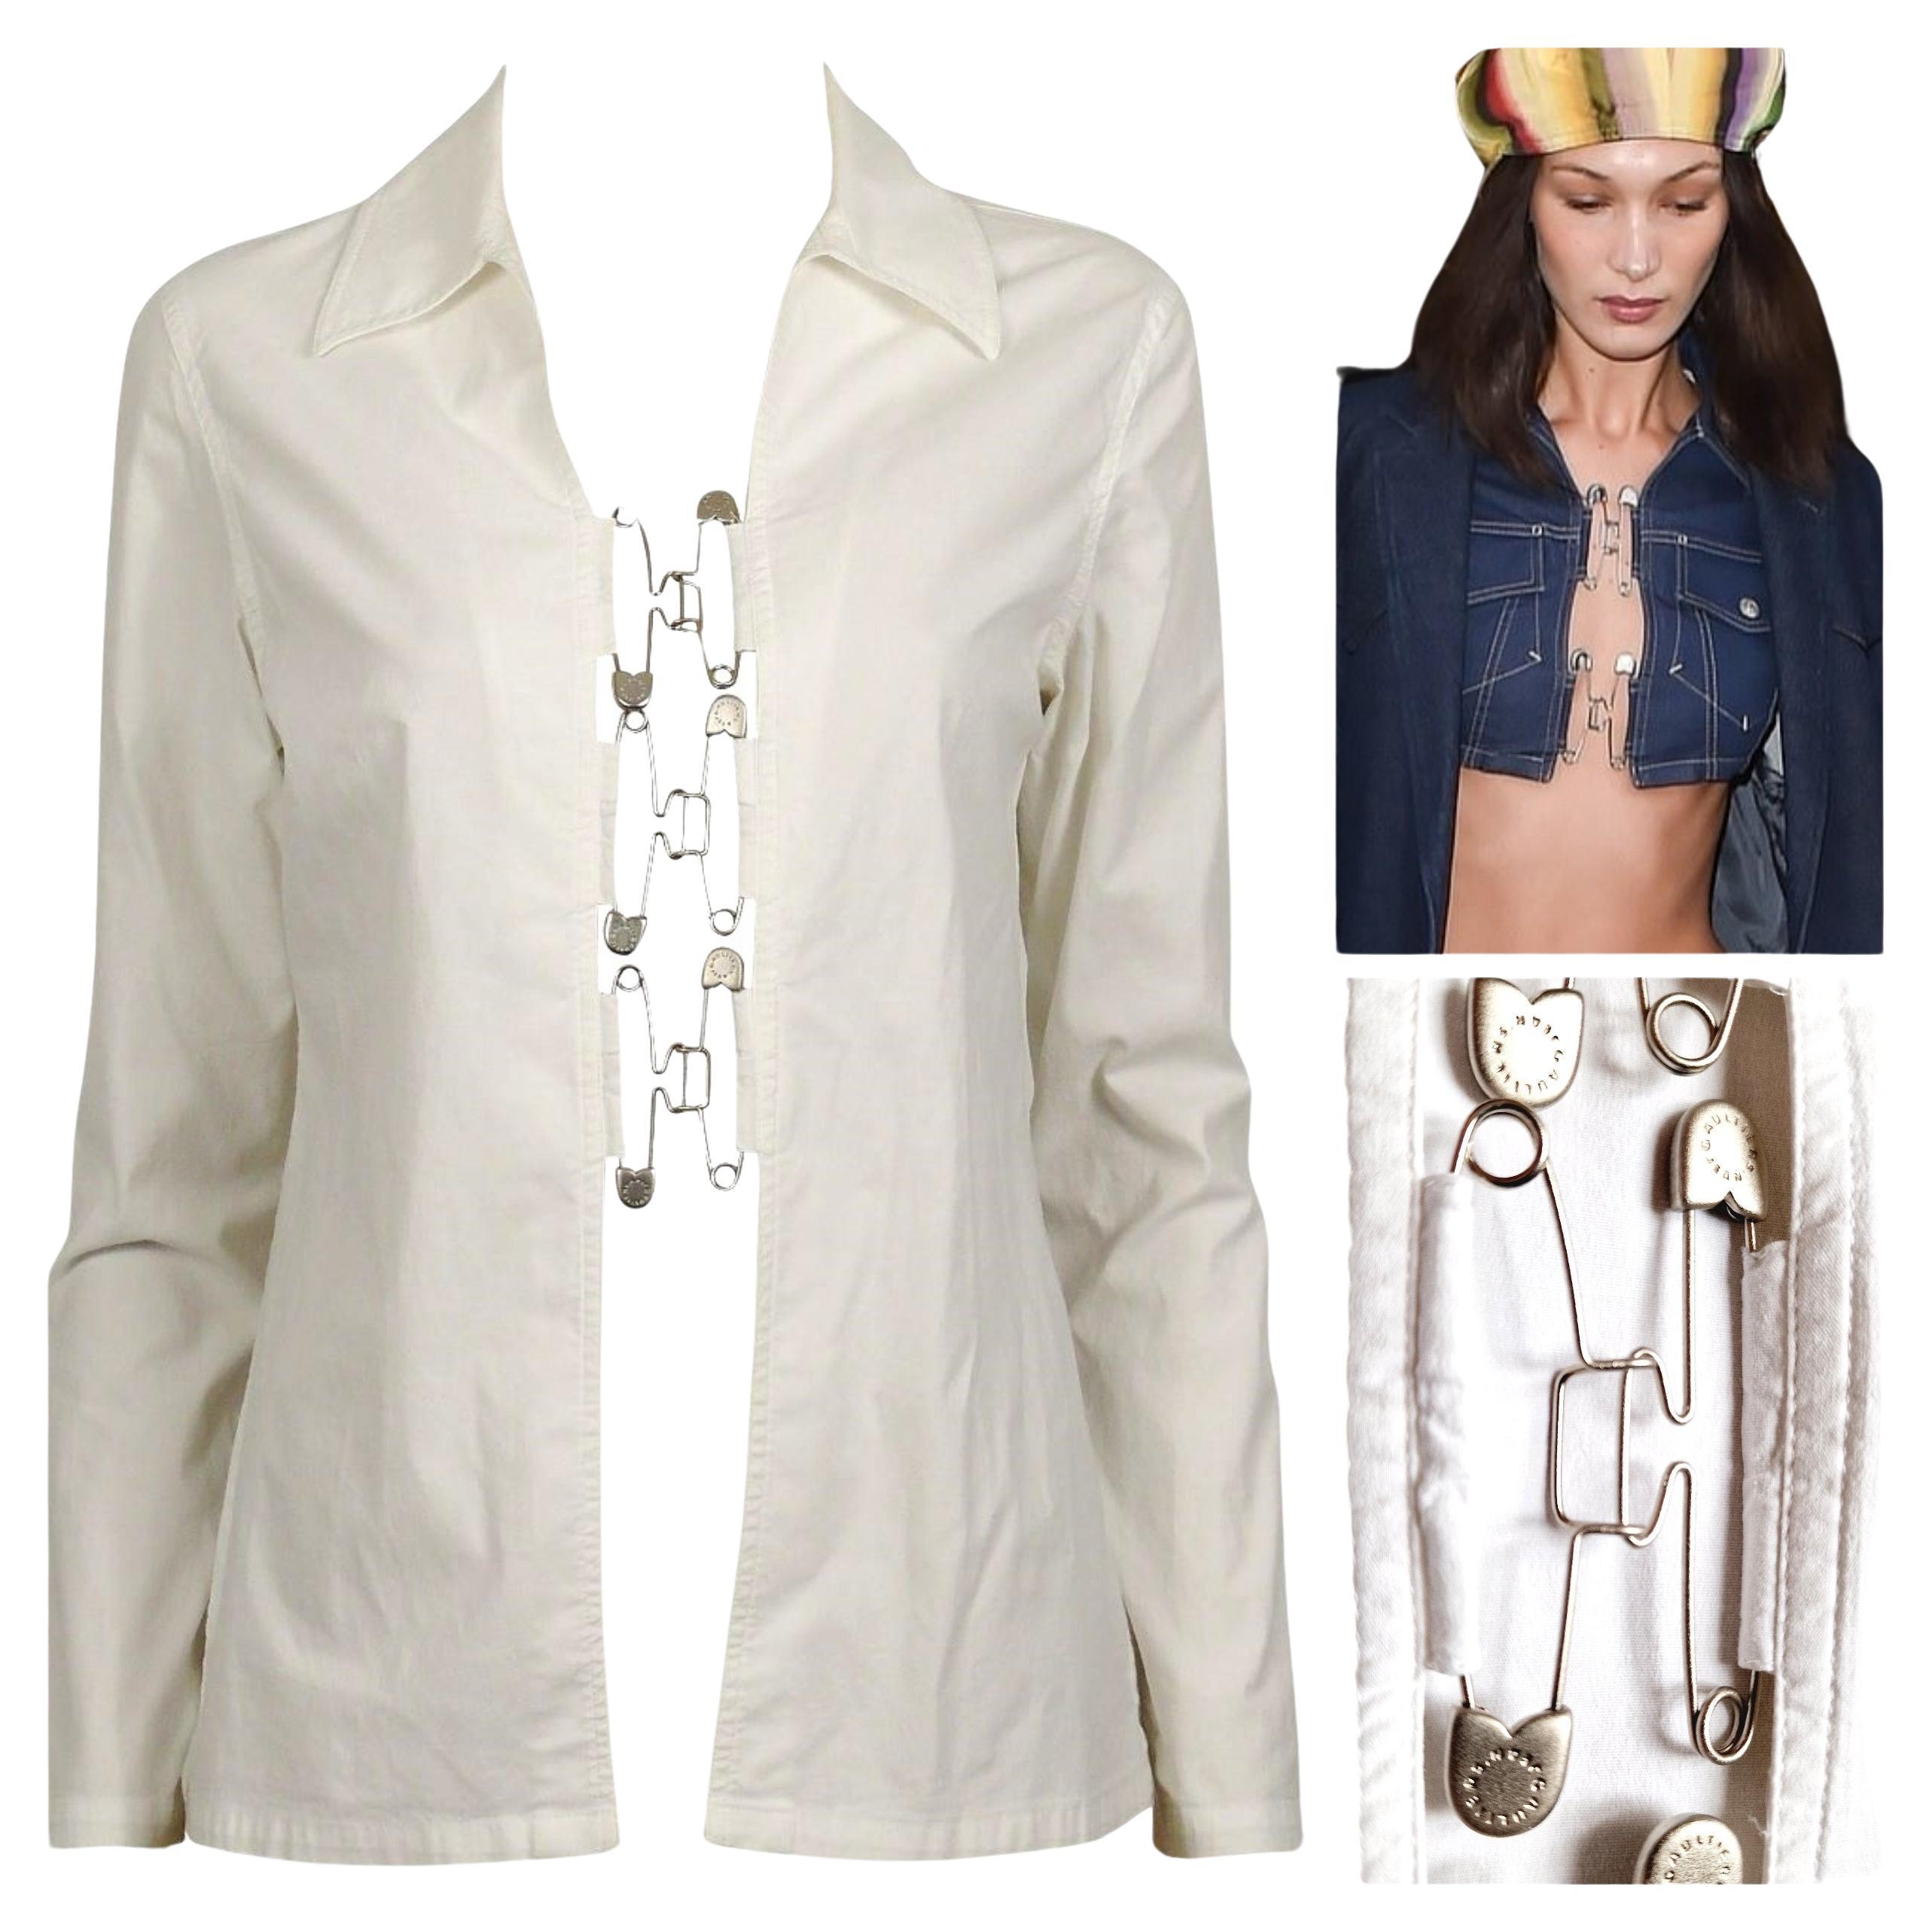 Jean Paul Gaultier Safety Pin Clips Vintage Bella Hadid White Shirt Blouse Top For Sale